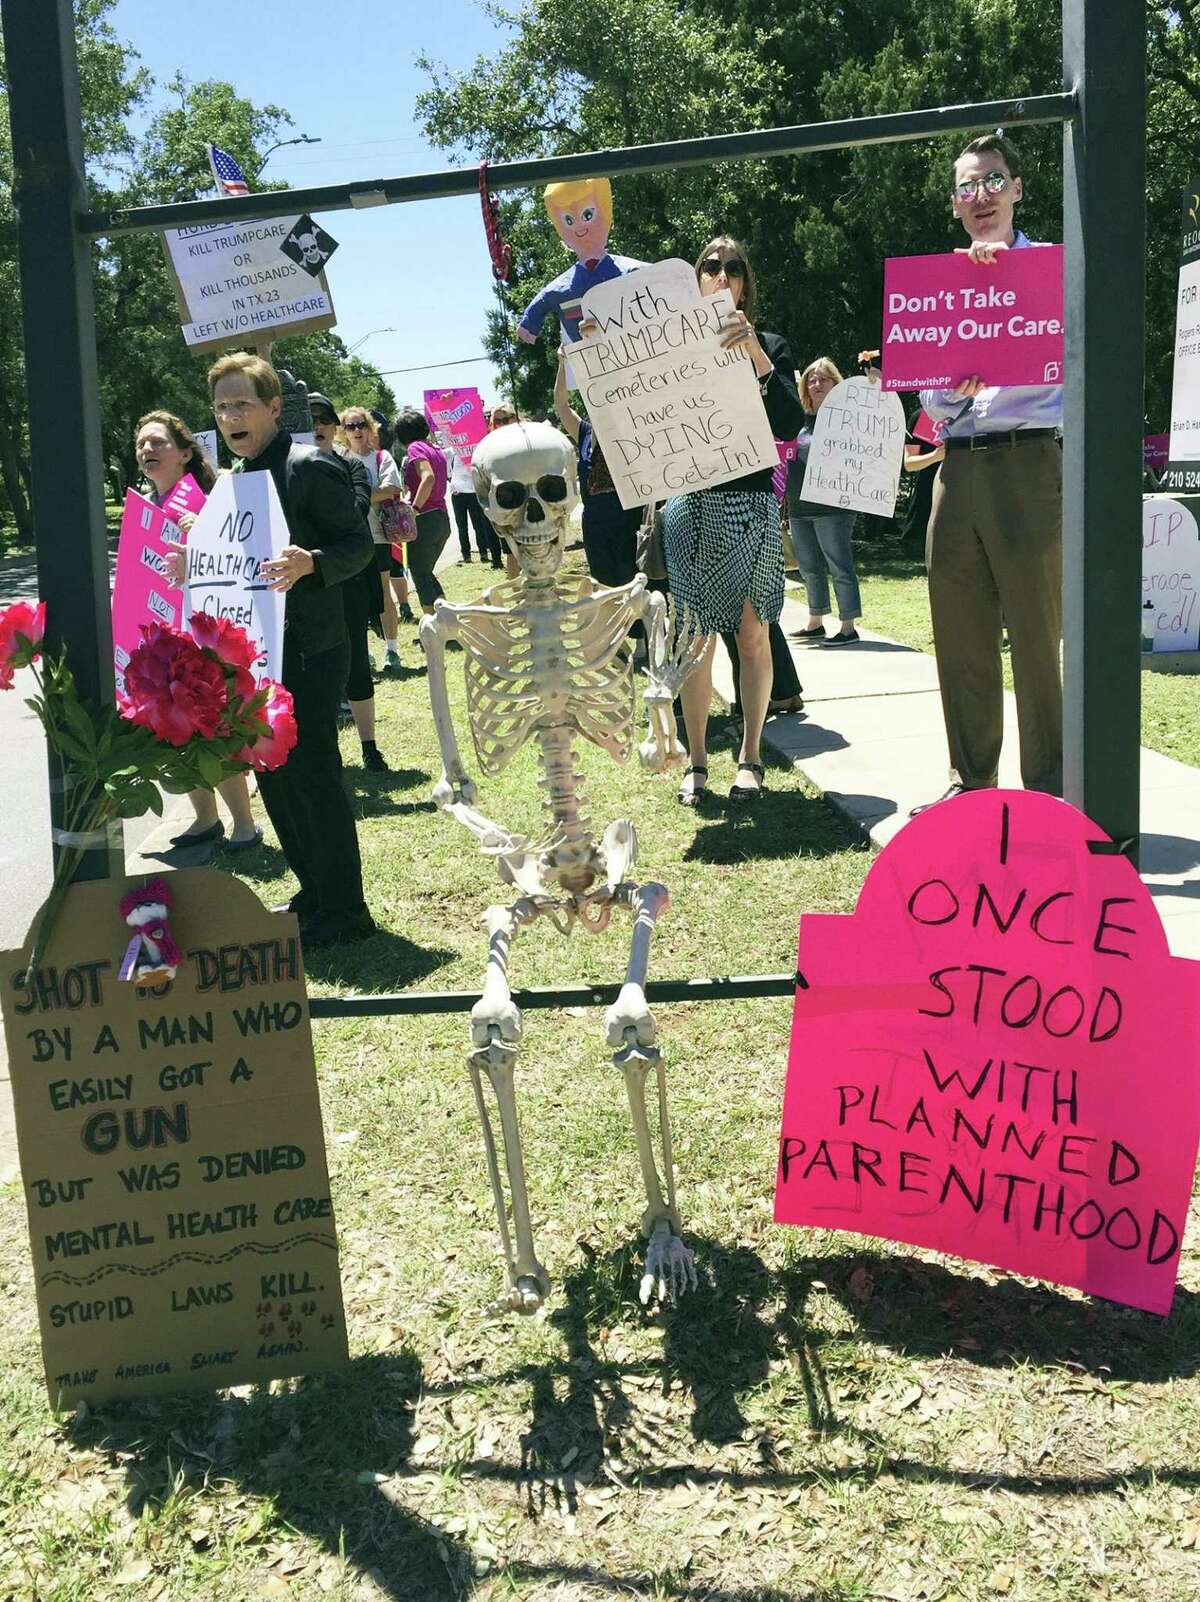 Protesters gather at U.S. Rep. Will Hurd’s San Antonio office for a "die-in" in the day that the Repbulican-led House of Representatives passed a new health care bill that could overturn the Affordable Care Act known as Obamacare.